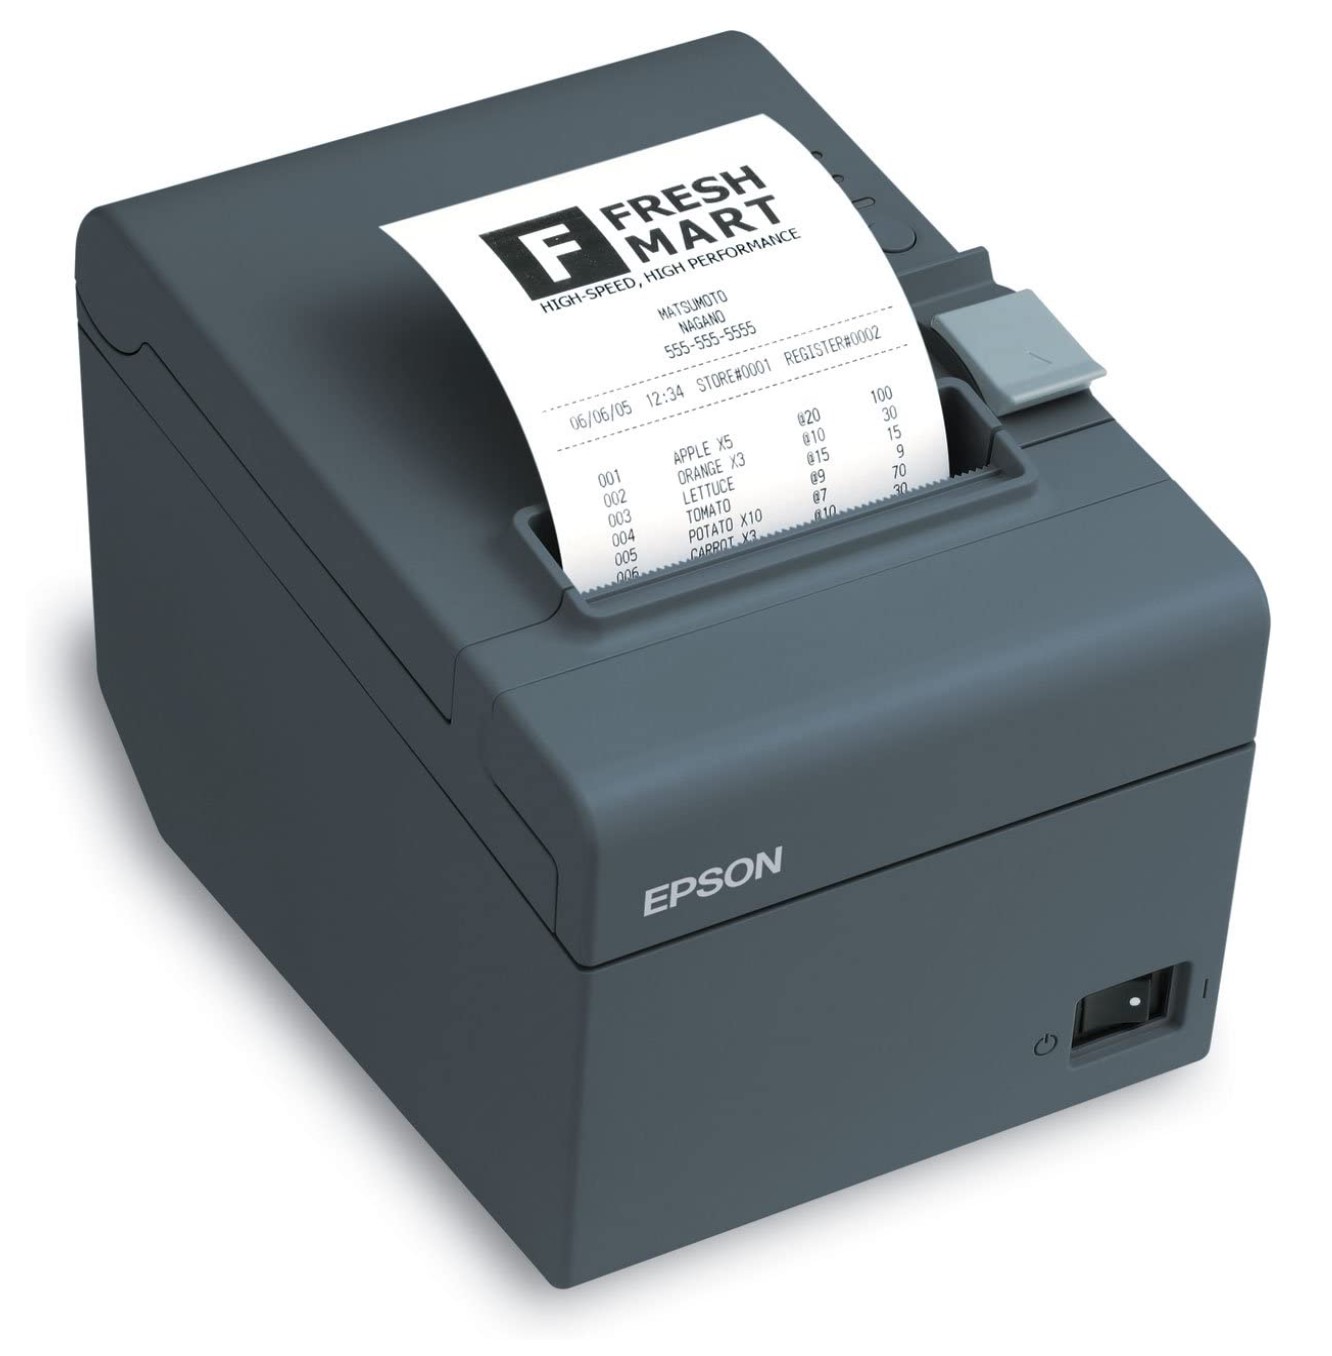 Atavoli.com Epson Ready Print T20 Direct Thermal Printer Point of Sale : Epson Ready Print T20 Direct Thermal Printer, Point-of-Sale (POS) Equipment Receipt Printers for Restaurants, Bars, Cafes, Bistros, Diners, Bakeries, Food Trucks, Hotels, Bed and Breakfasts, Resorts, Night Clubs